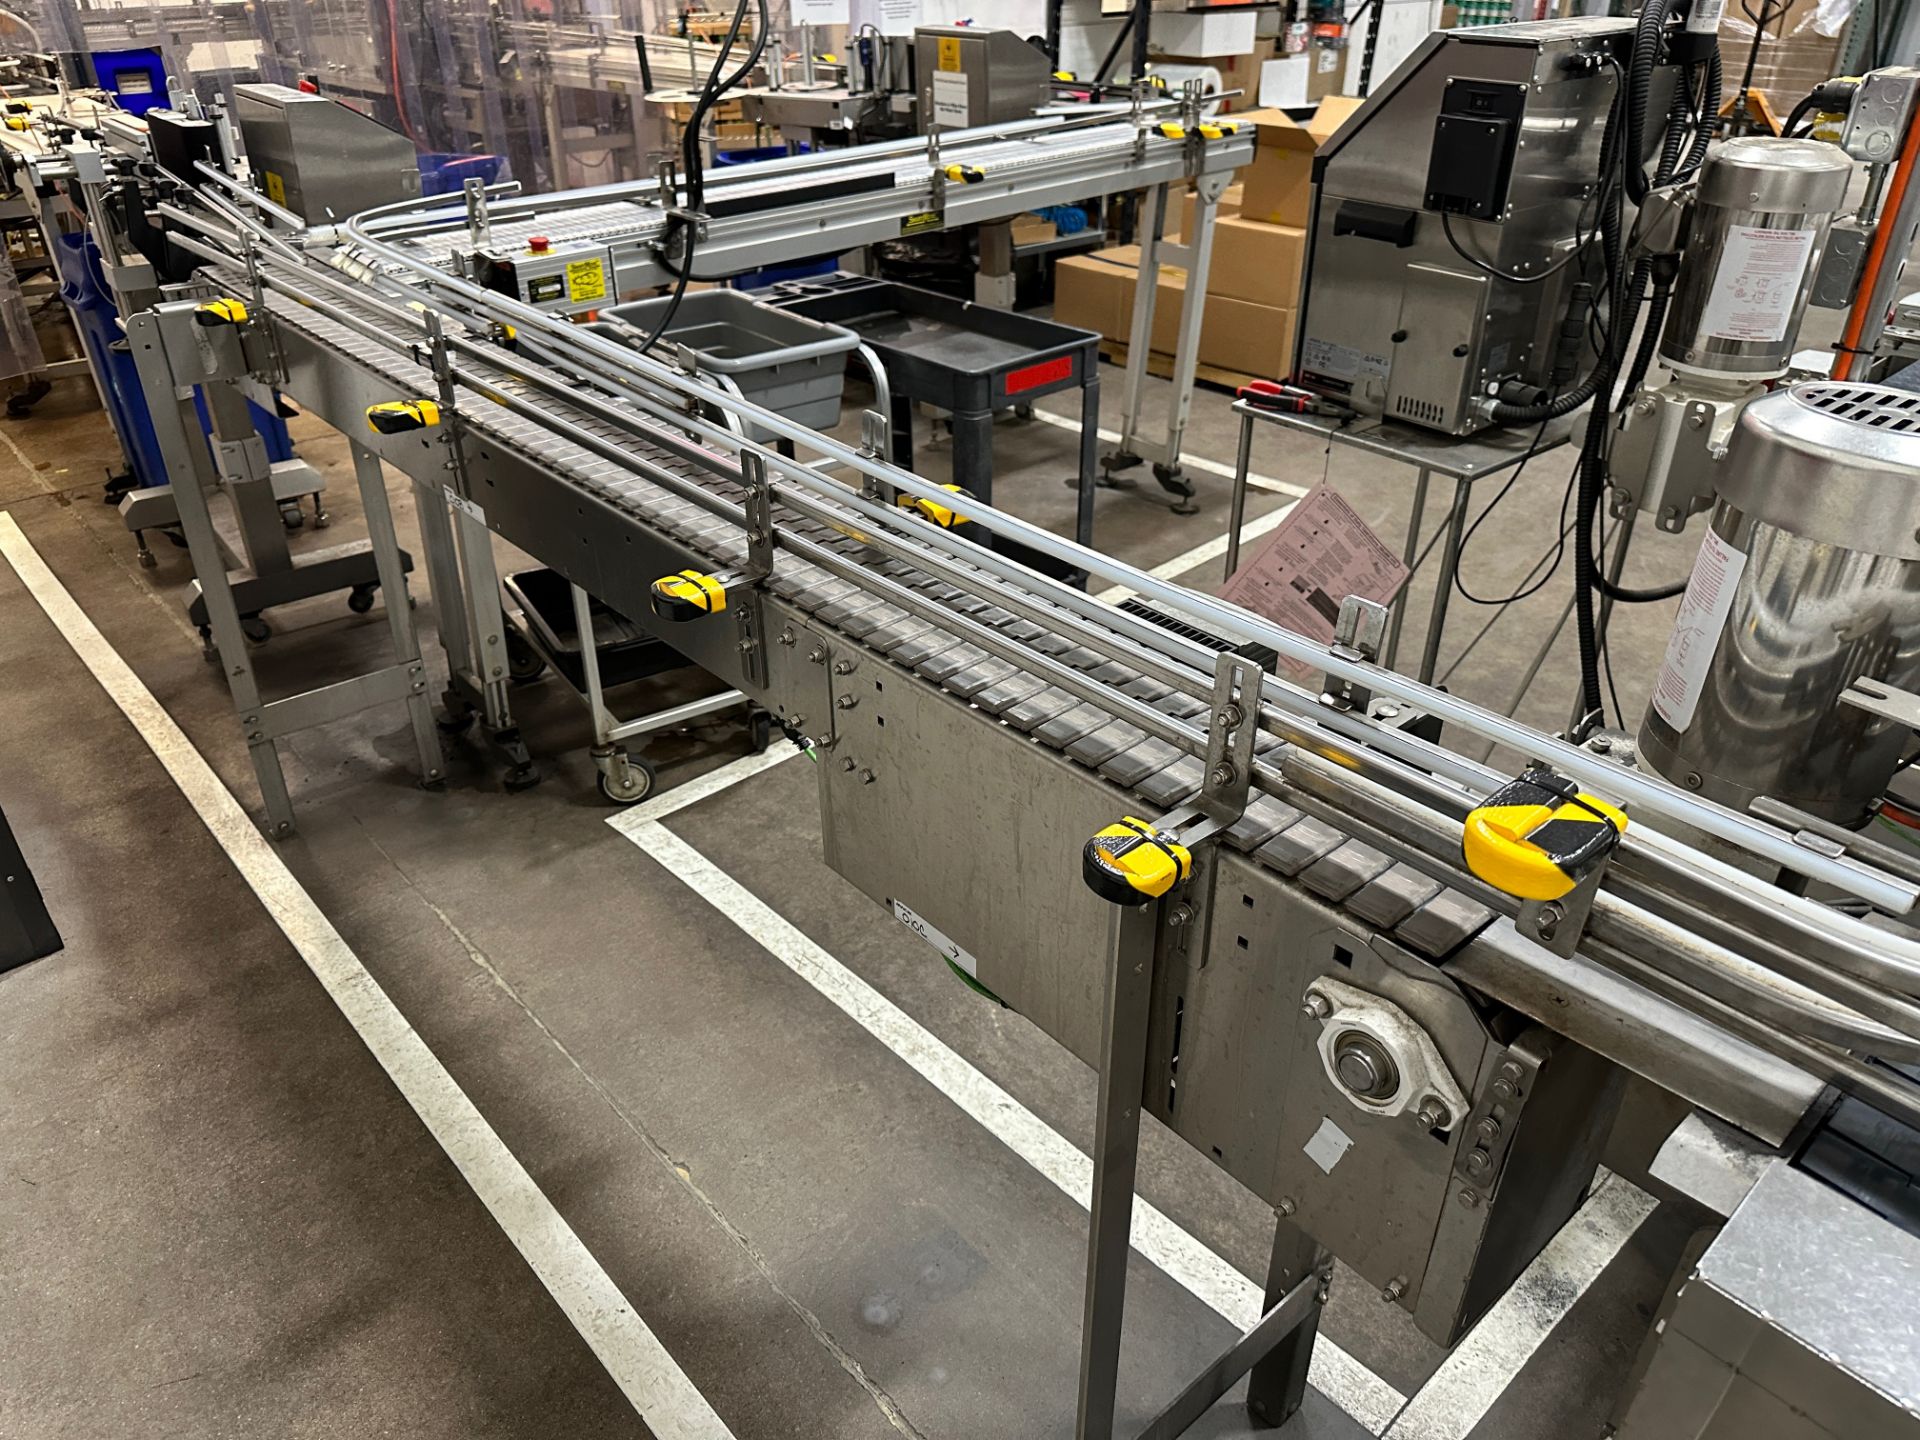 MCE Conveyor from Labelers to Accumulation Table (Approx. 7.5" x 9') | Rig Fee $150 - Image 3 of 3